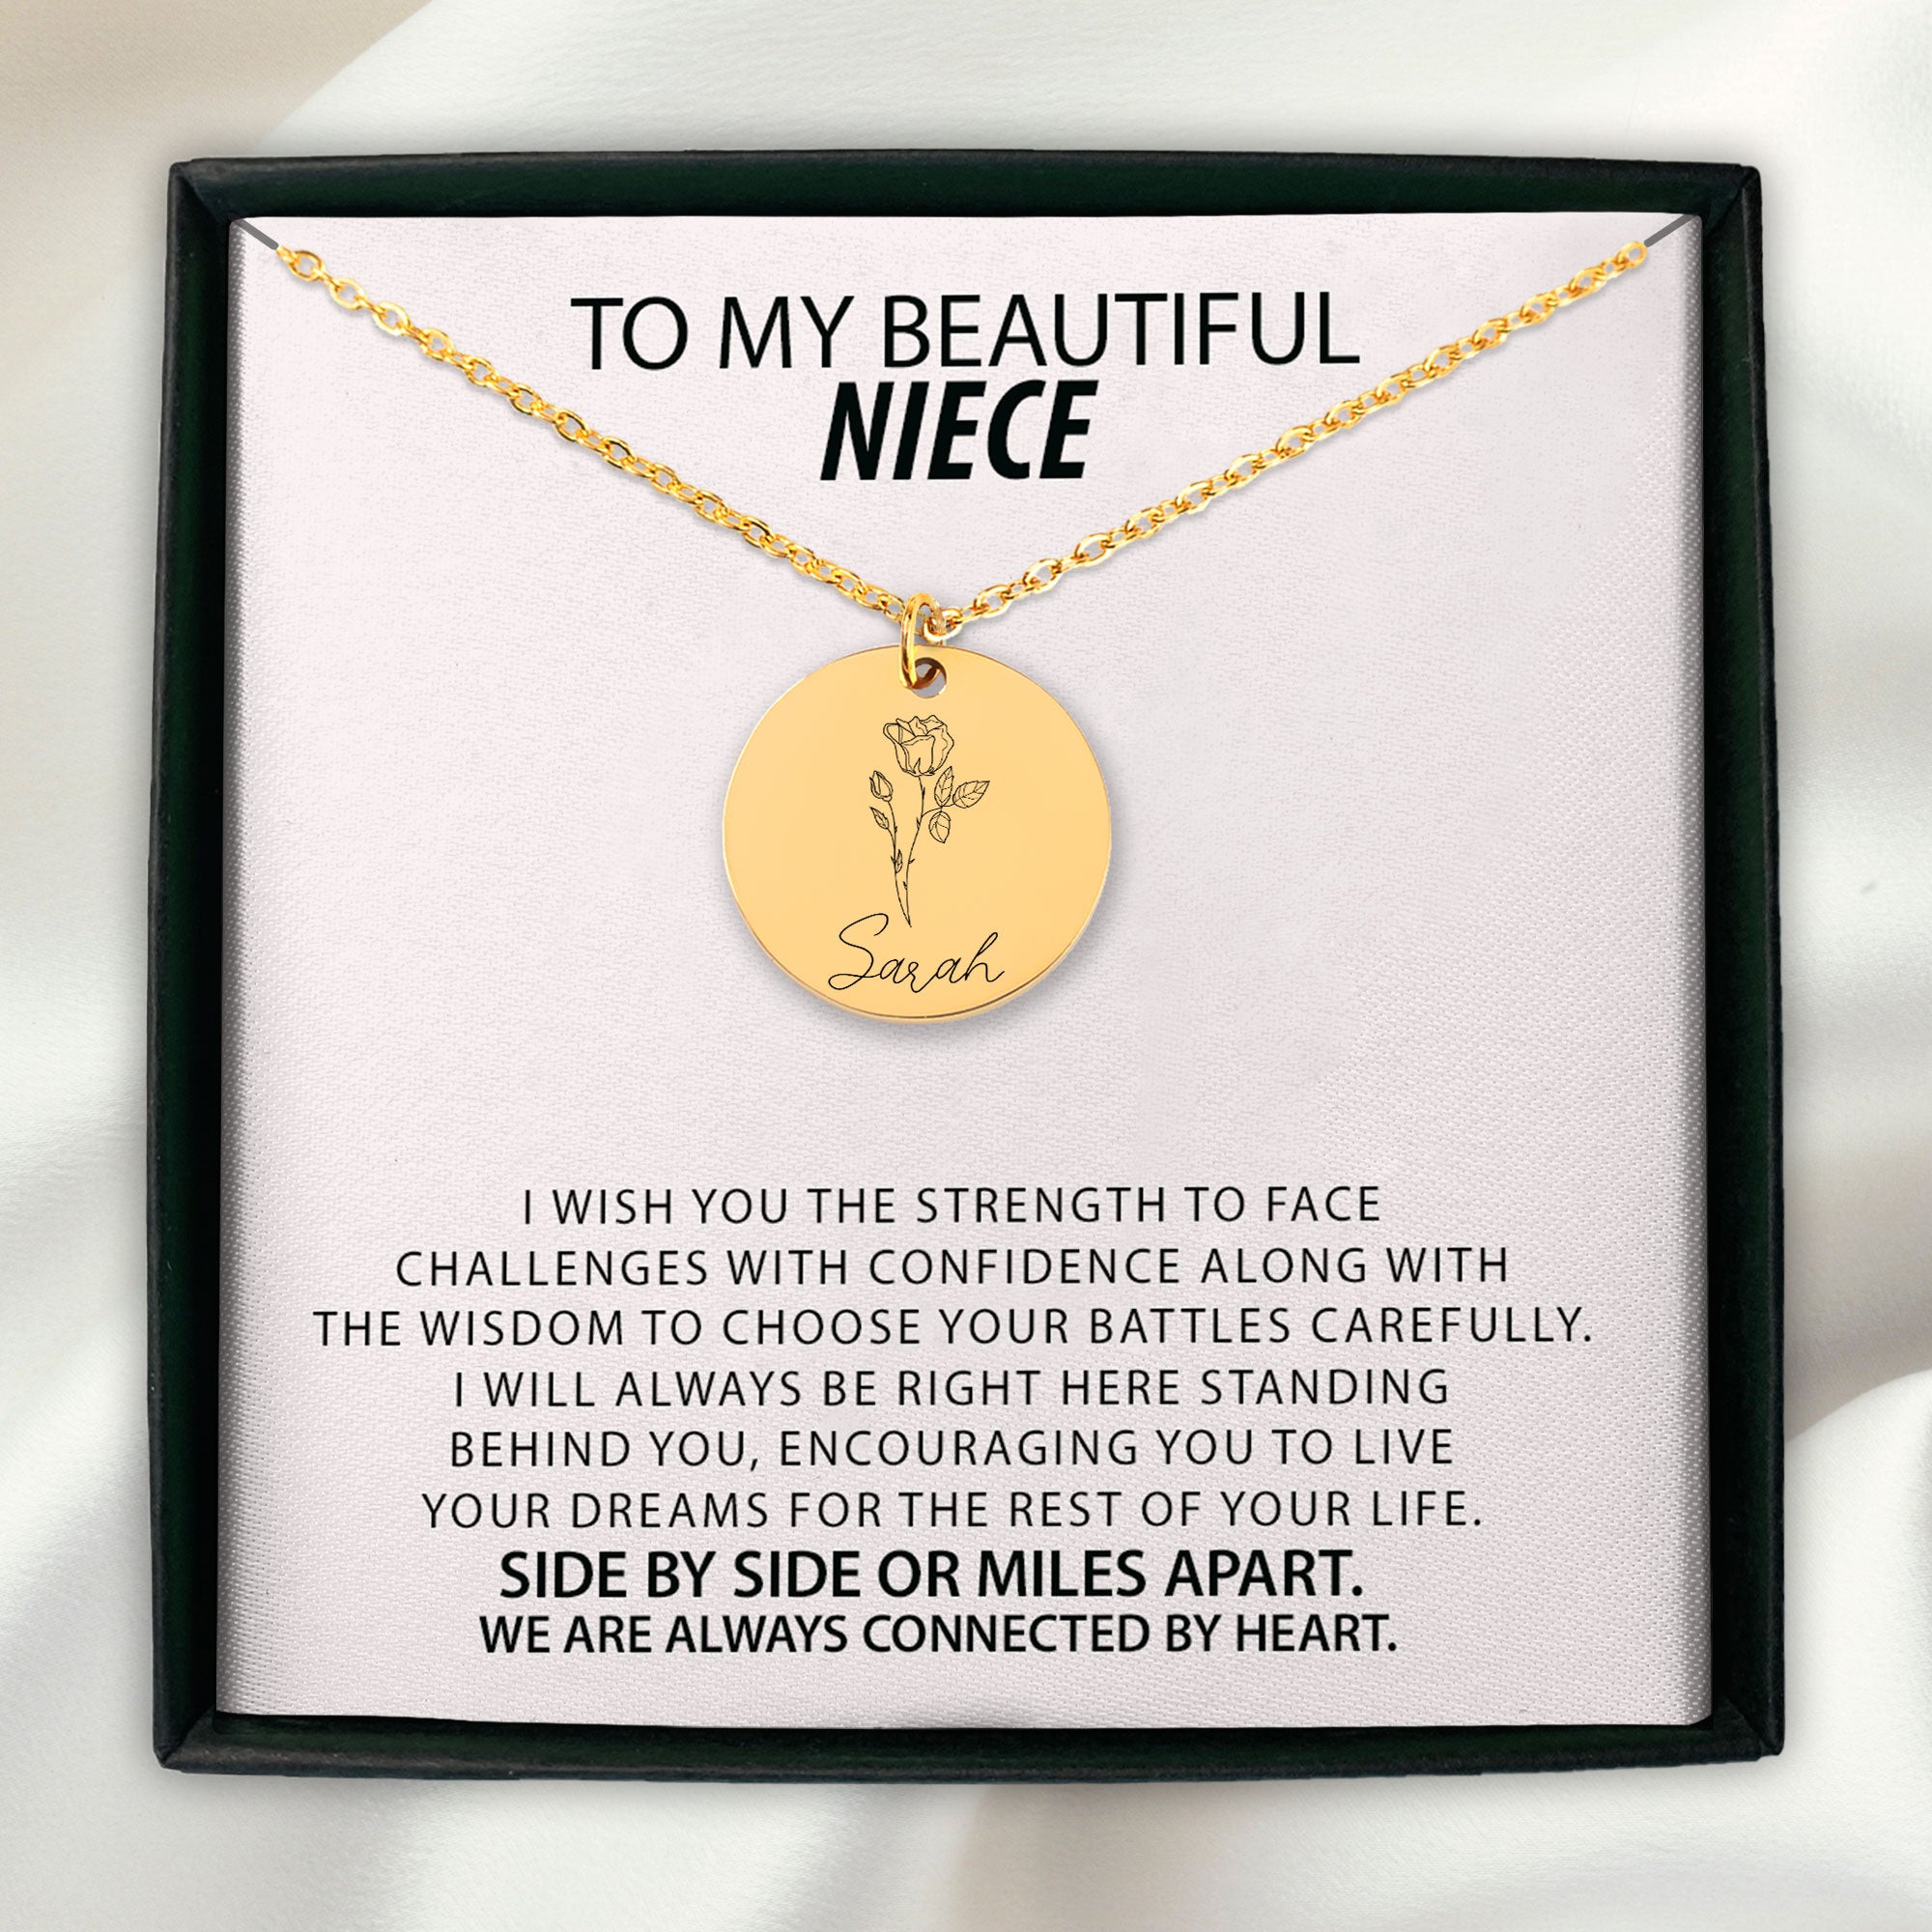 To My Beautiful Niece Personalized Birth Flower Necklace | Gifts for Niece, From Uncle, From Aunt | Customized Birth Flower Gift for Girls